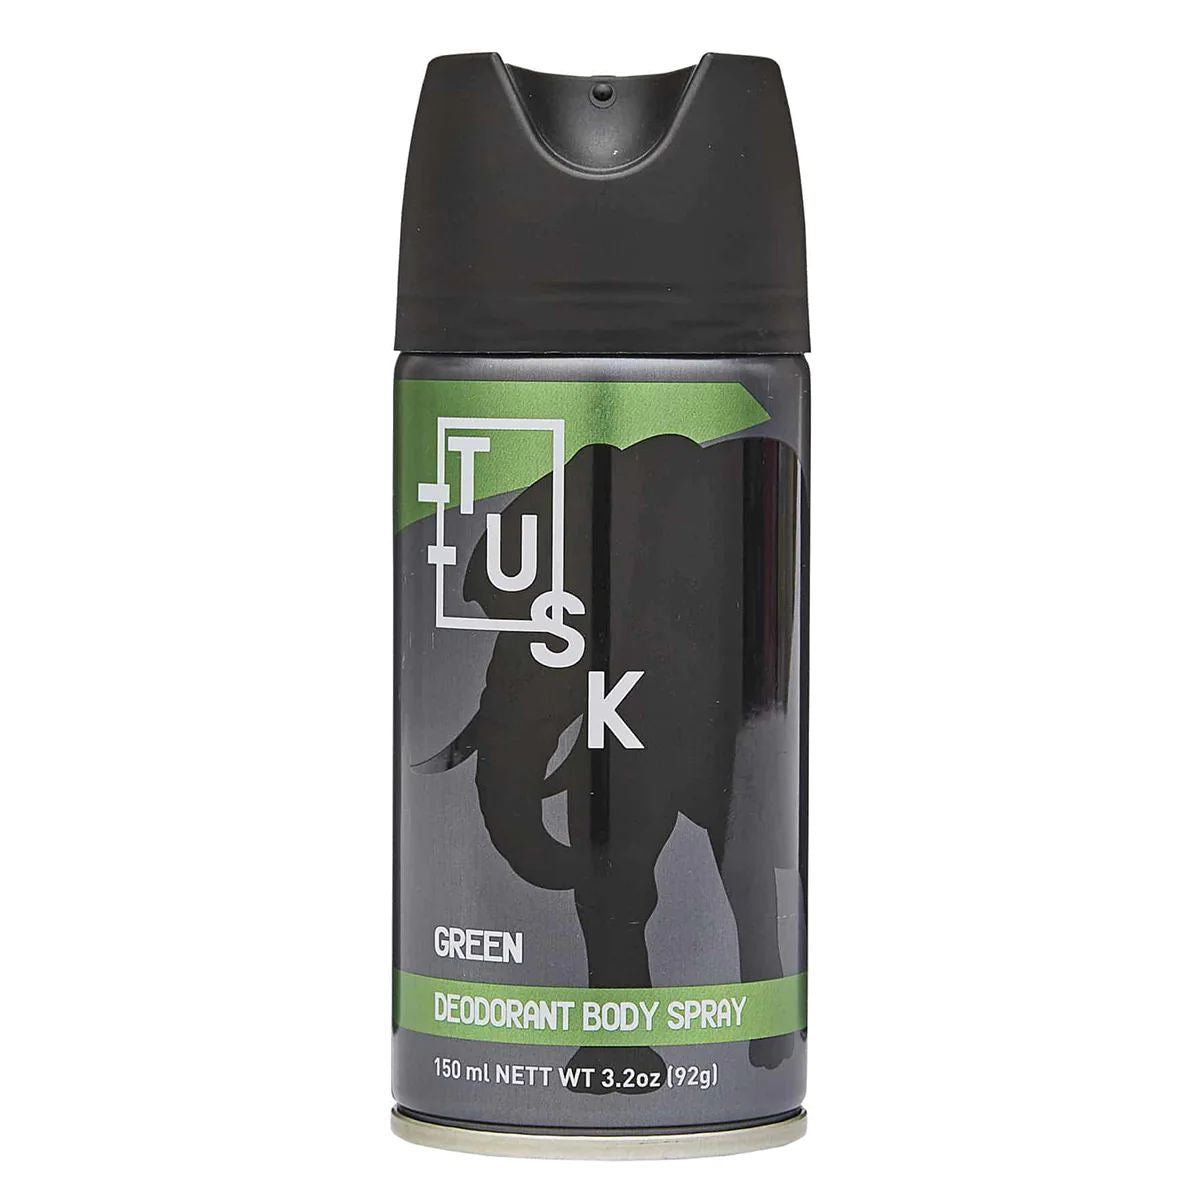 A container of Tusk - Green Deodorant Body Spray - 150ml or 3.2 oz.